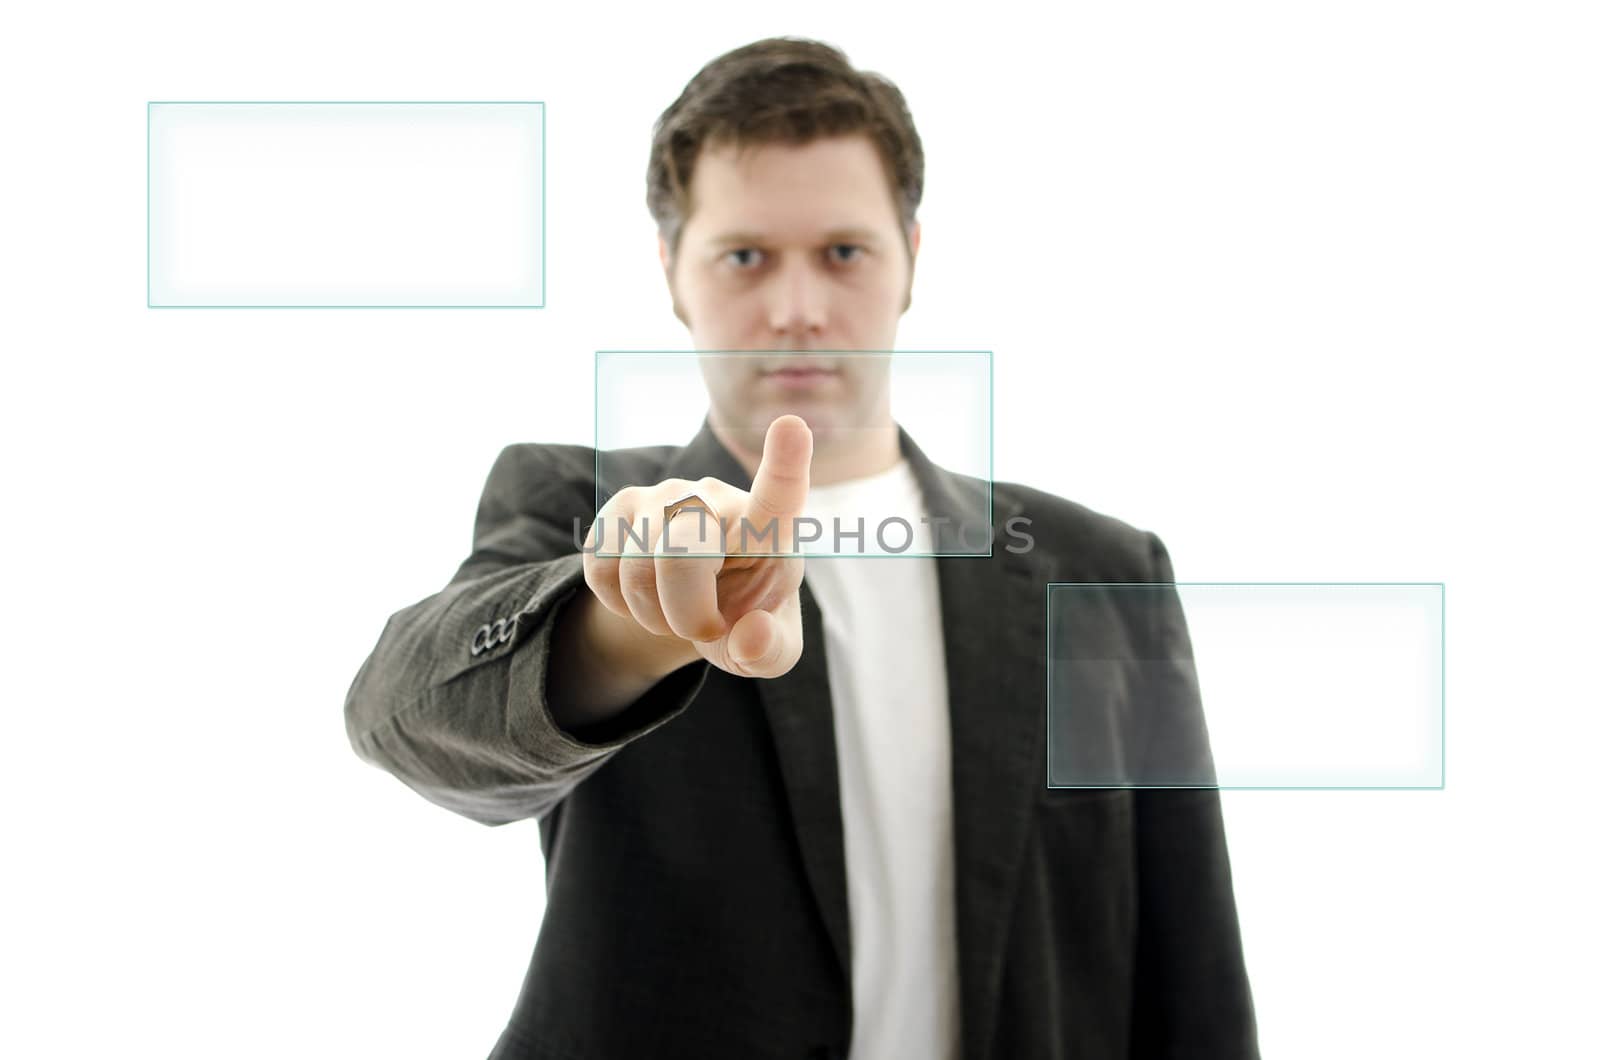 Business man pushing an ampty button on a touch screen interface. Place for your text. Isolated on white.